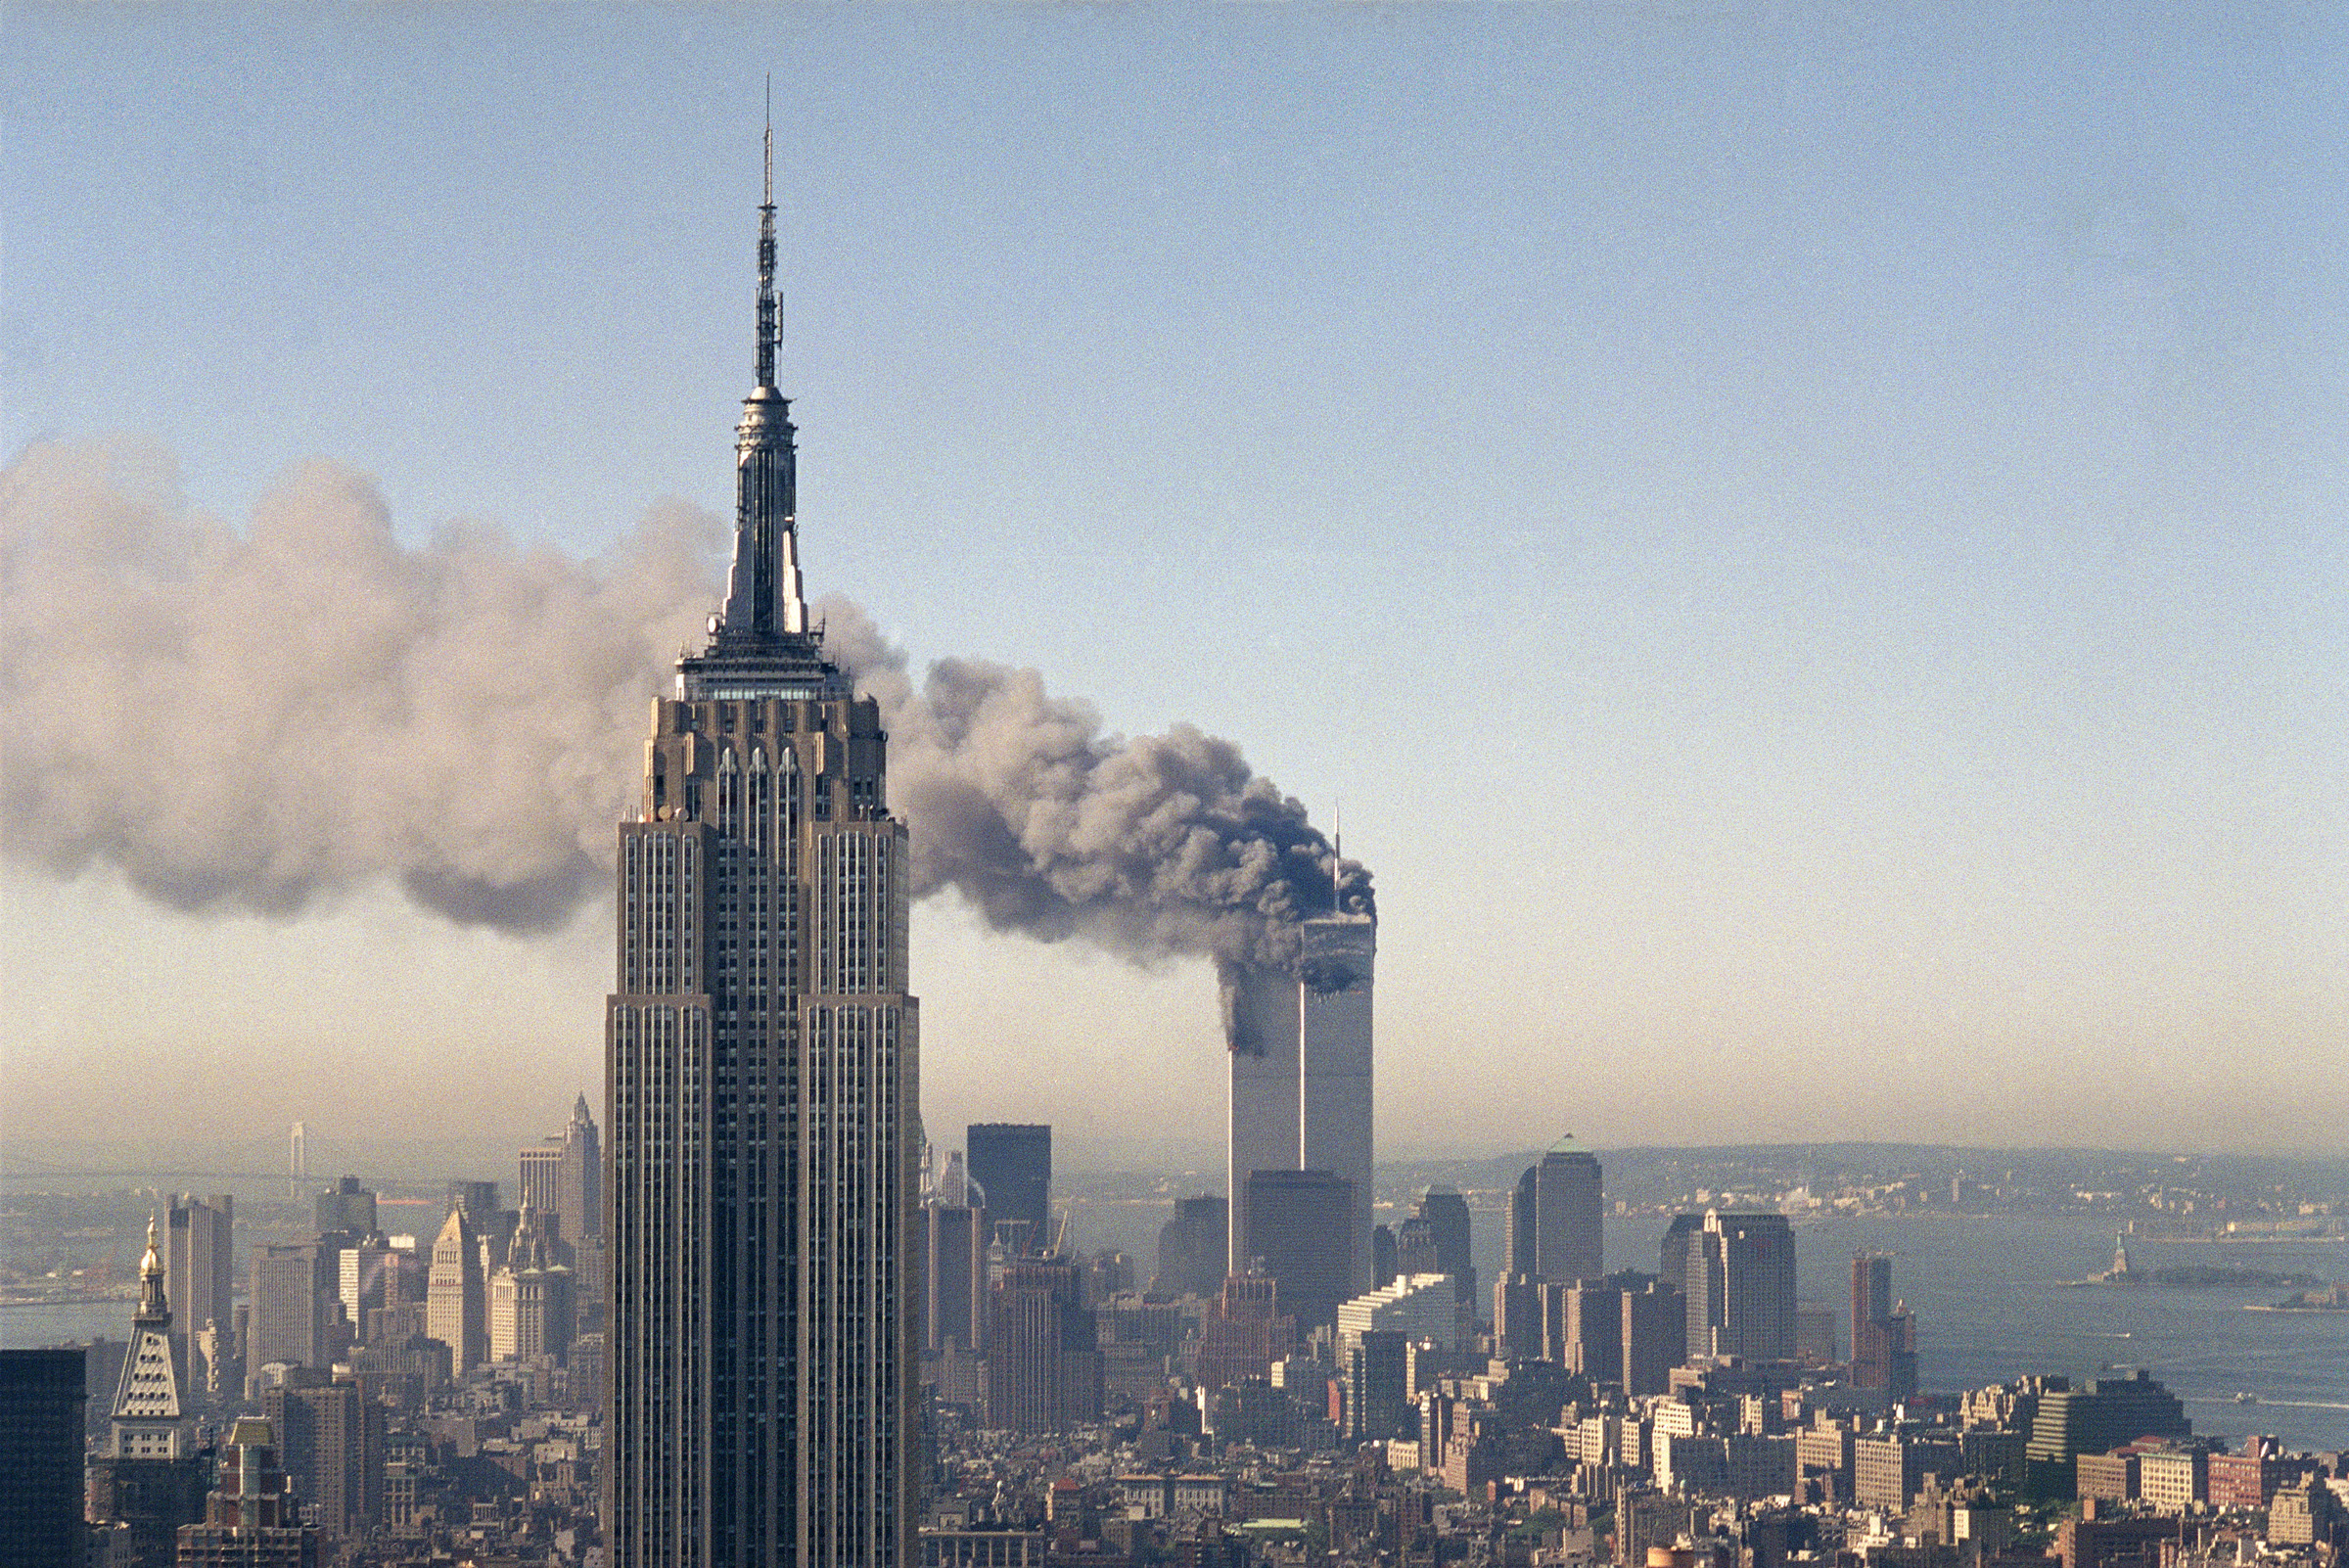 The twin towers of the World Trade Center burn behind the Empire State Building in New York after terrorists crashed two planes into the towers causing both to collapse, Sept. 11, 2001. (Marty Lederhandler—AP)